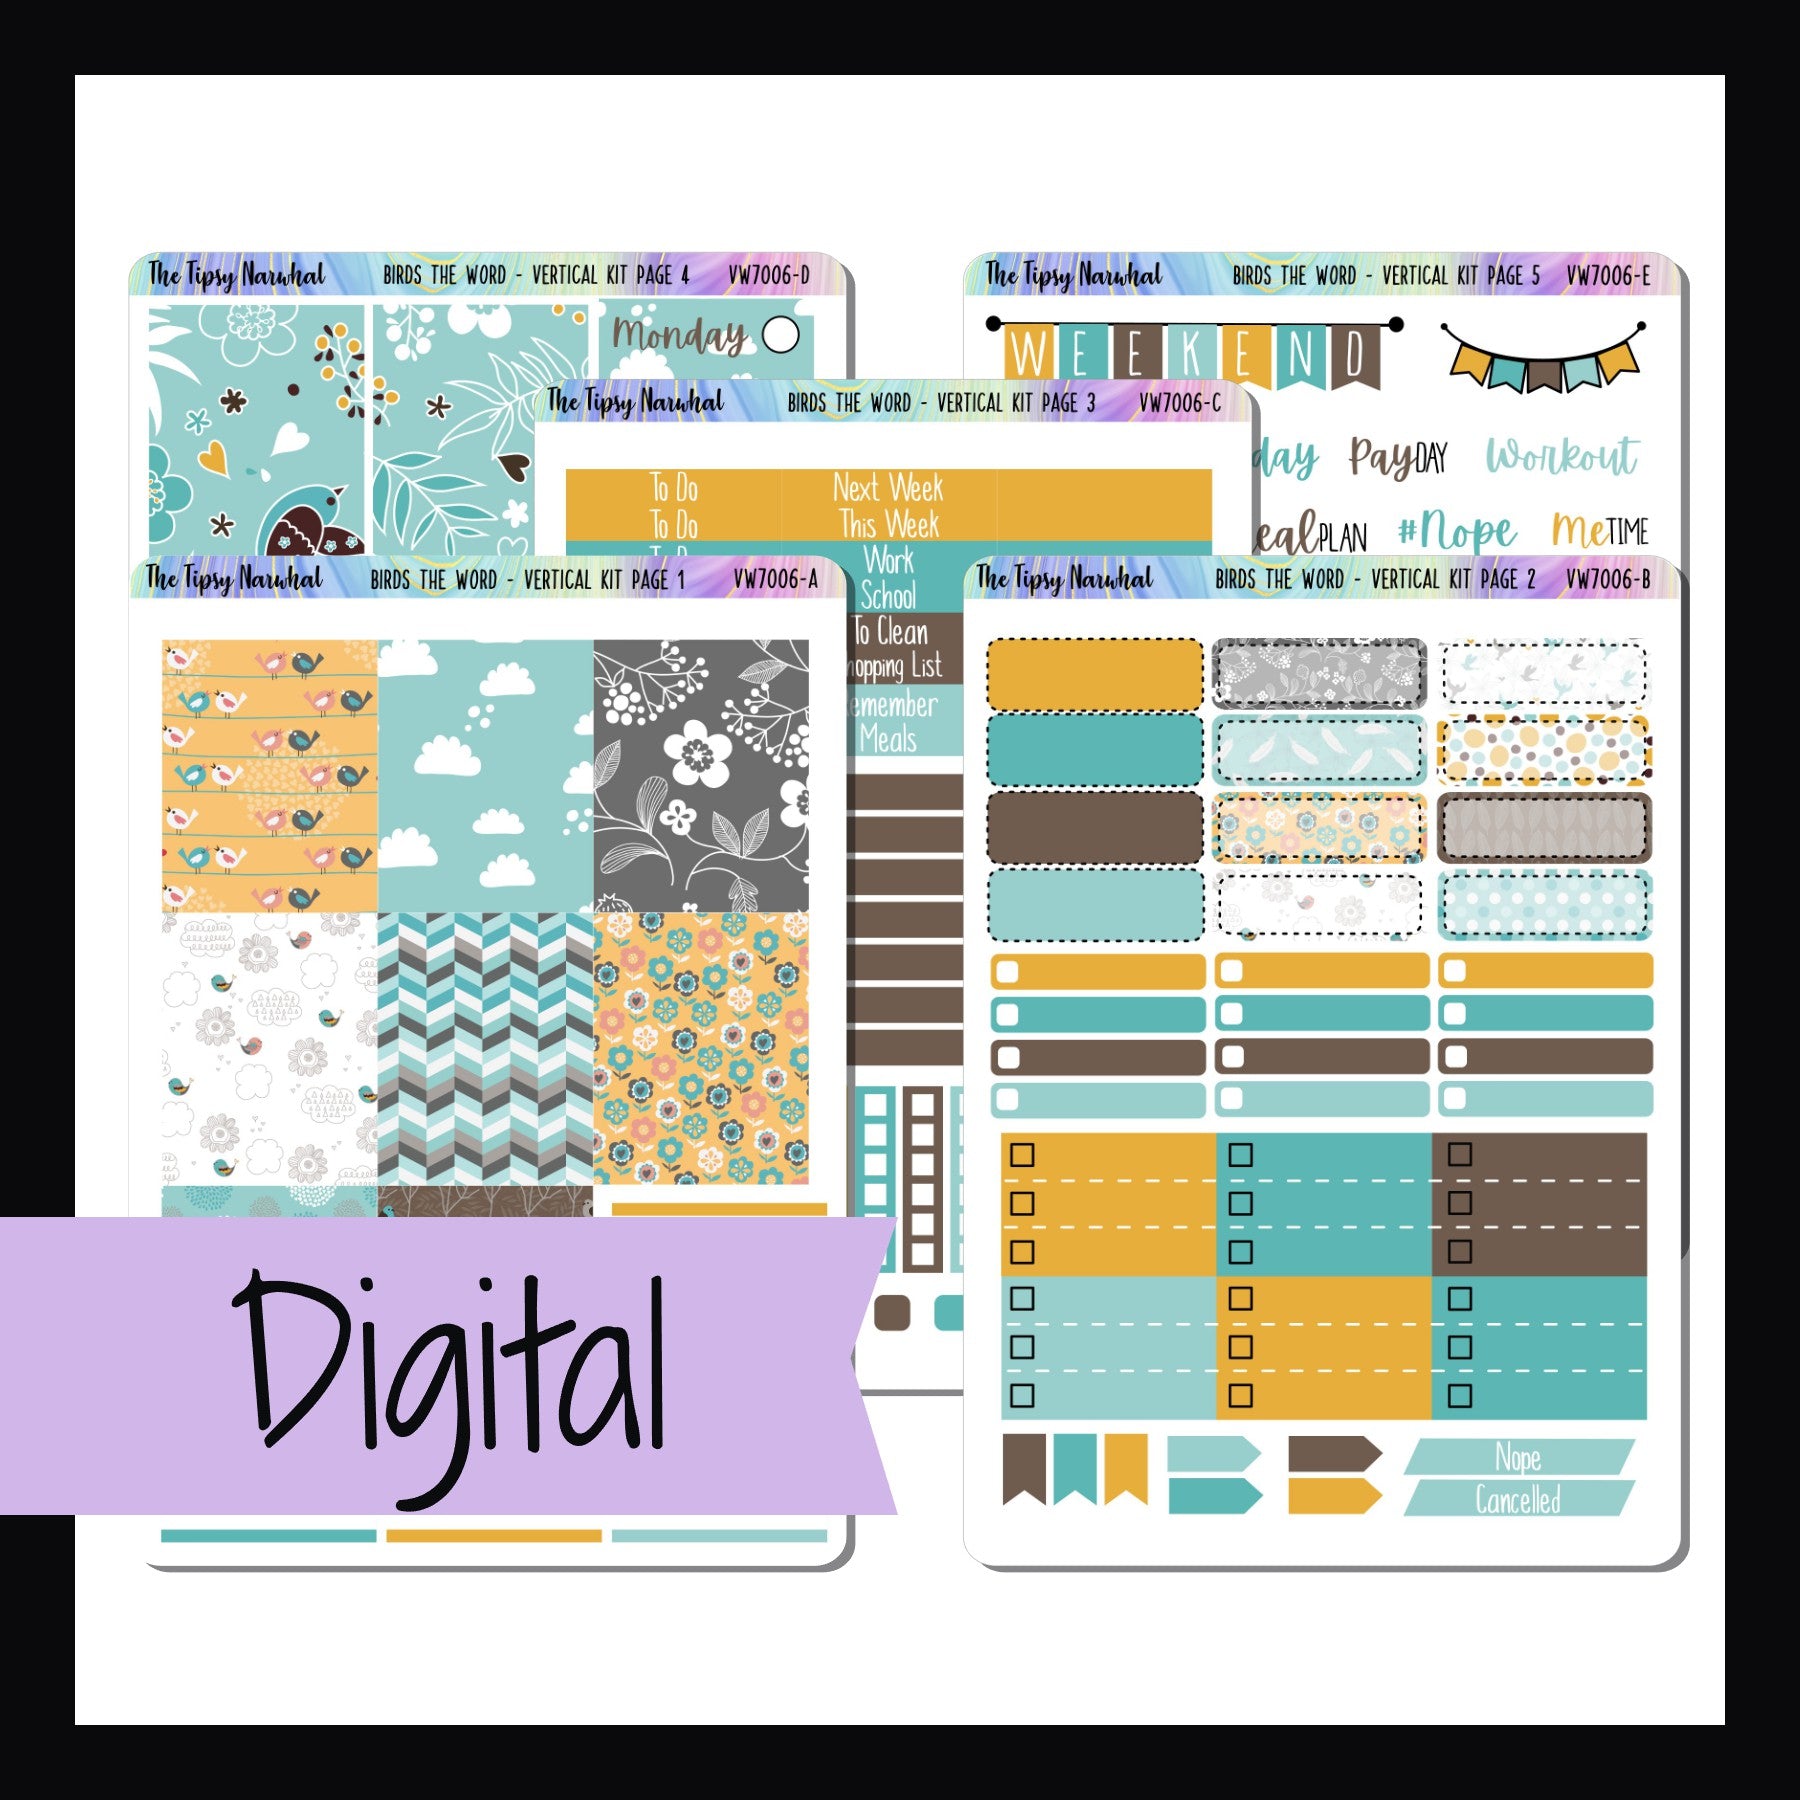 Digital Birds the Word Vertical Kit is a digital/printable version of the vertical kit by the same name. It is a 5 page sticker kit with a bird theme and a bright color palette of yellows, teals and browns. 